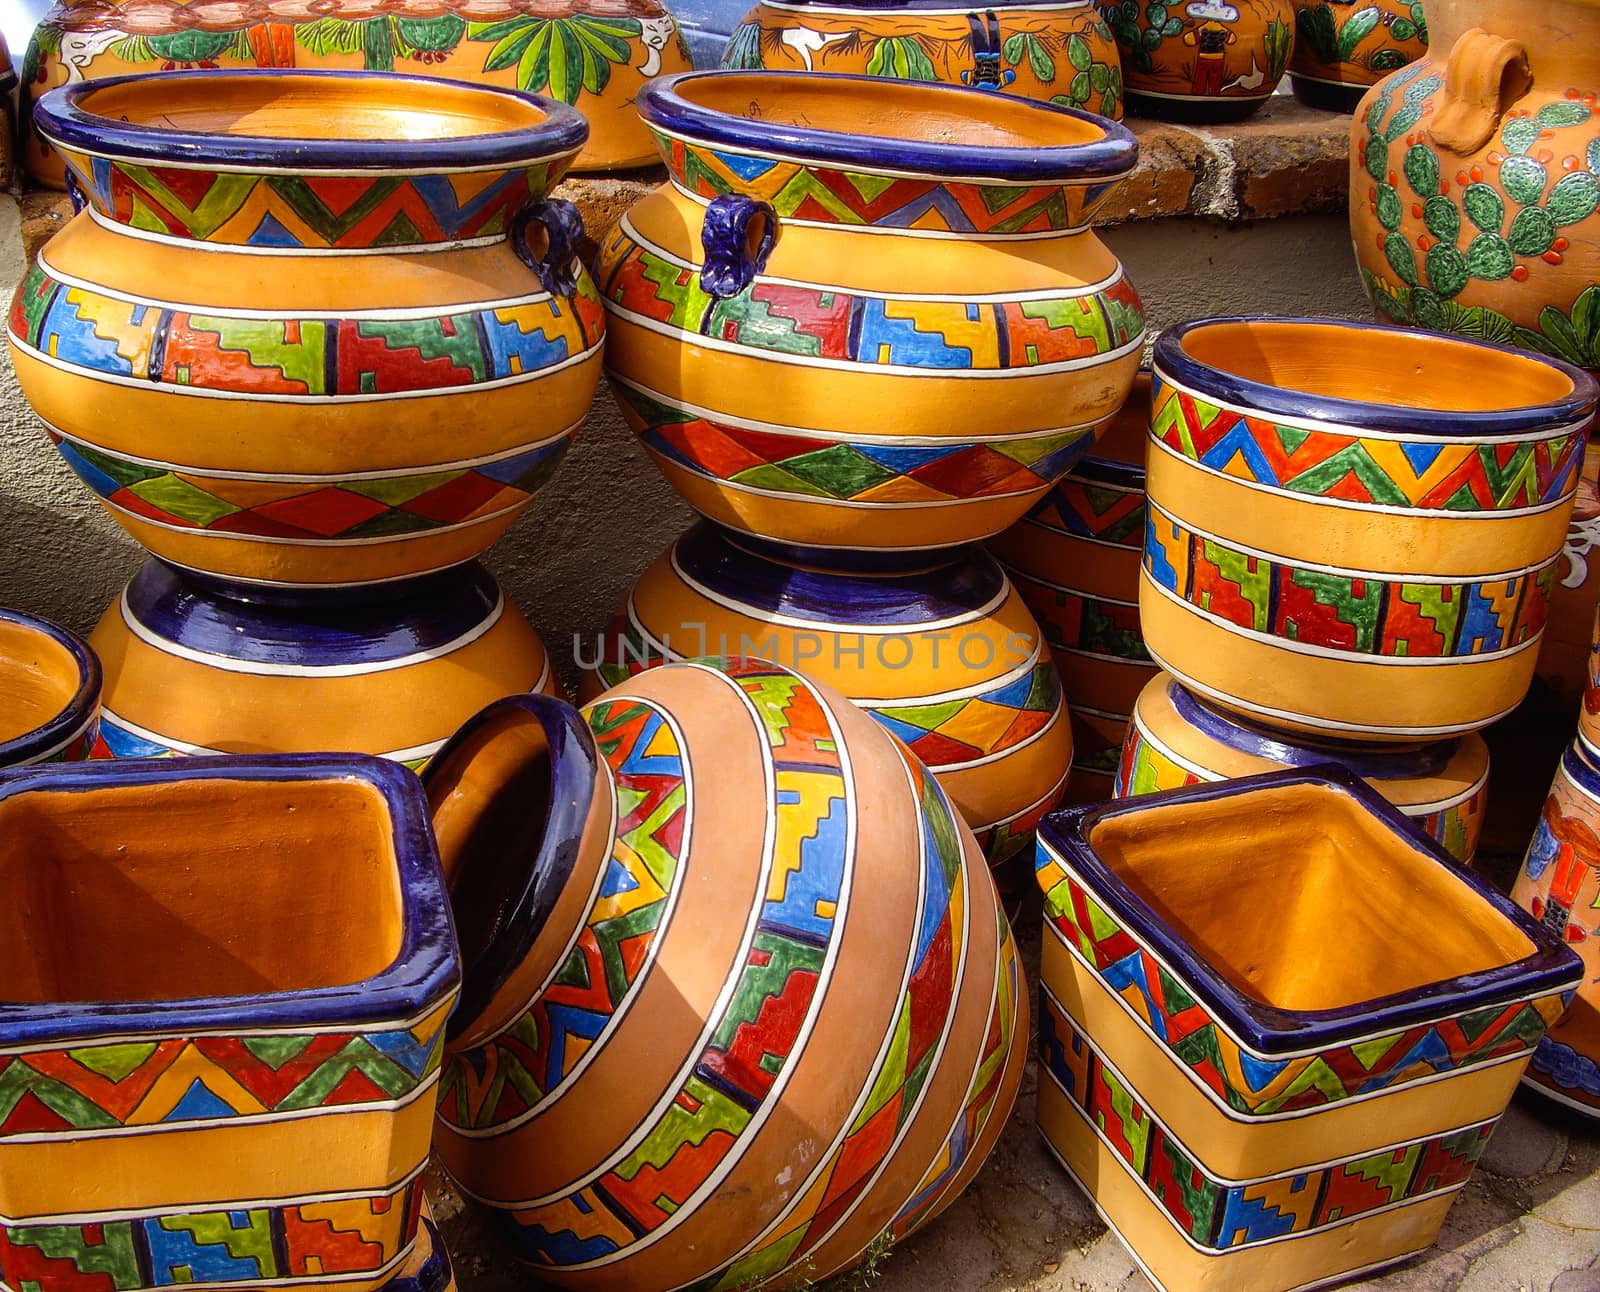 Talavera pots with traditional Mexican designs by emattil